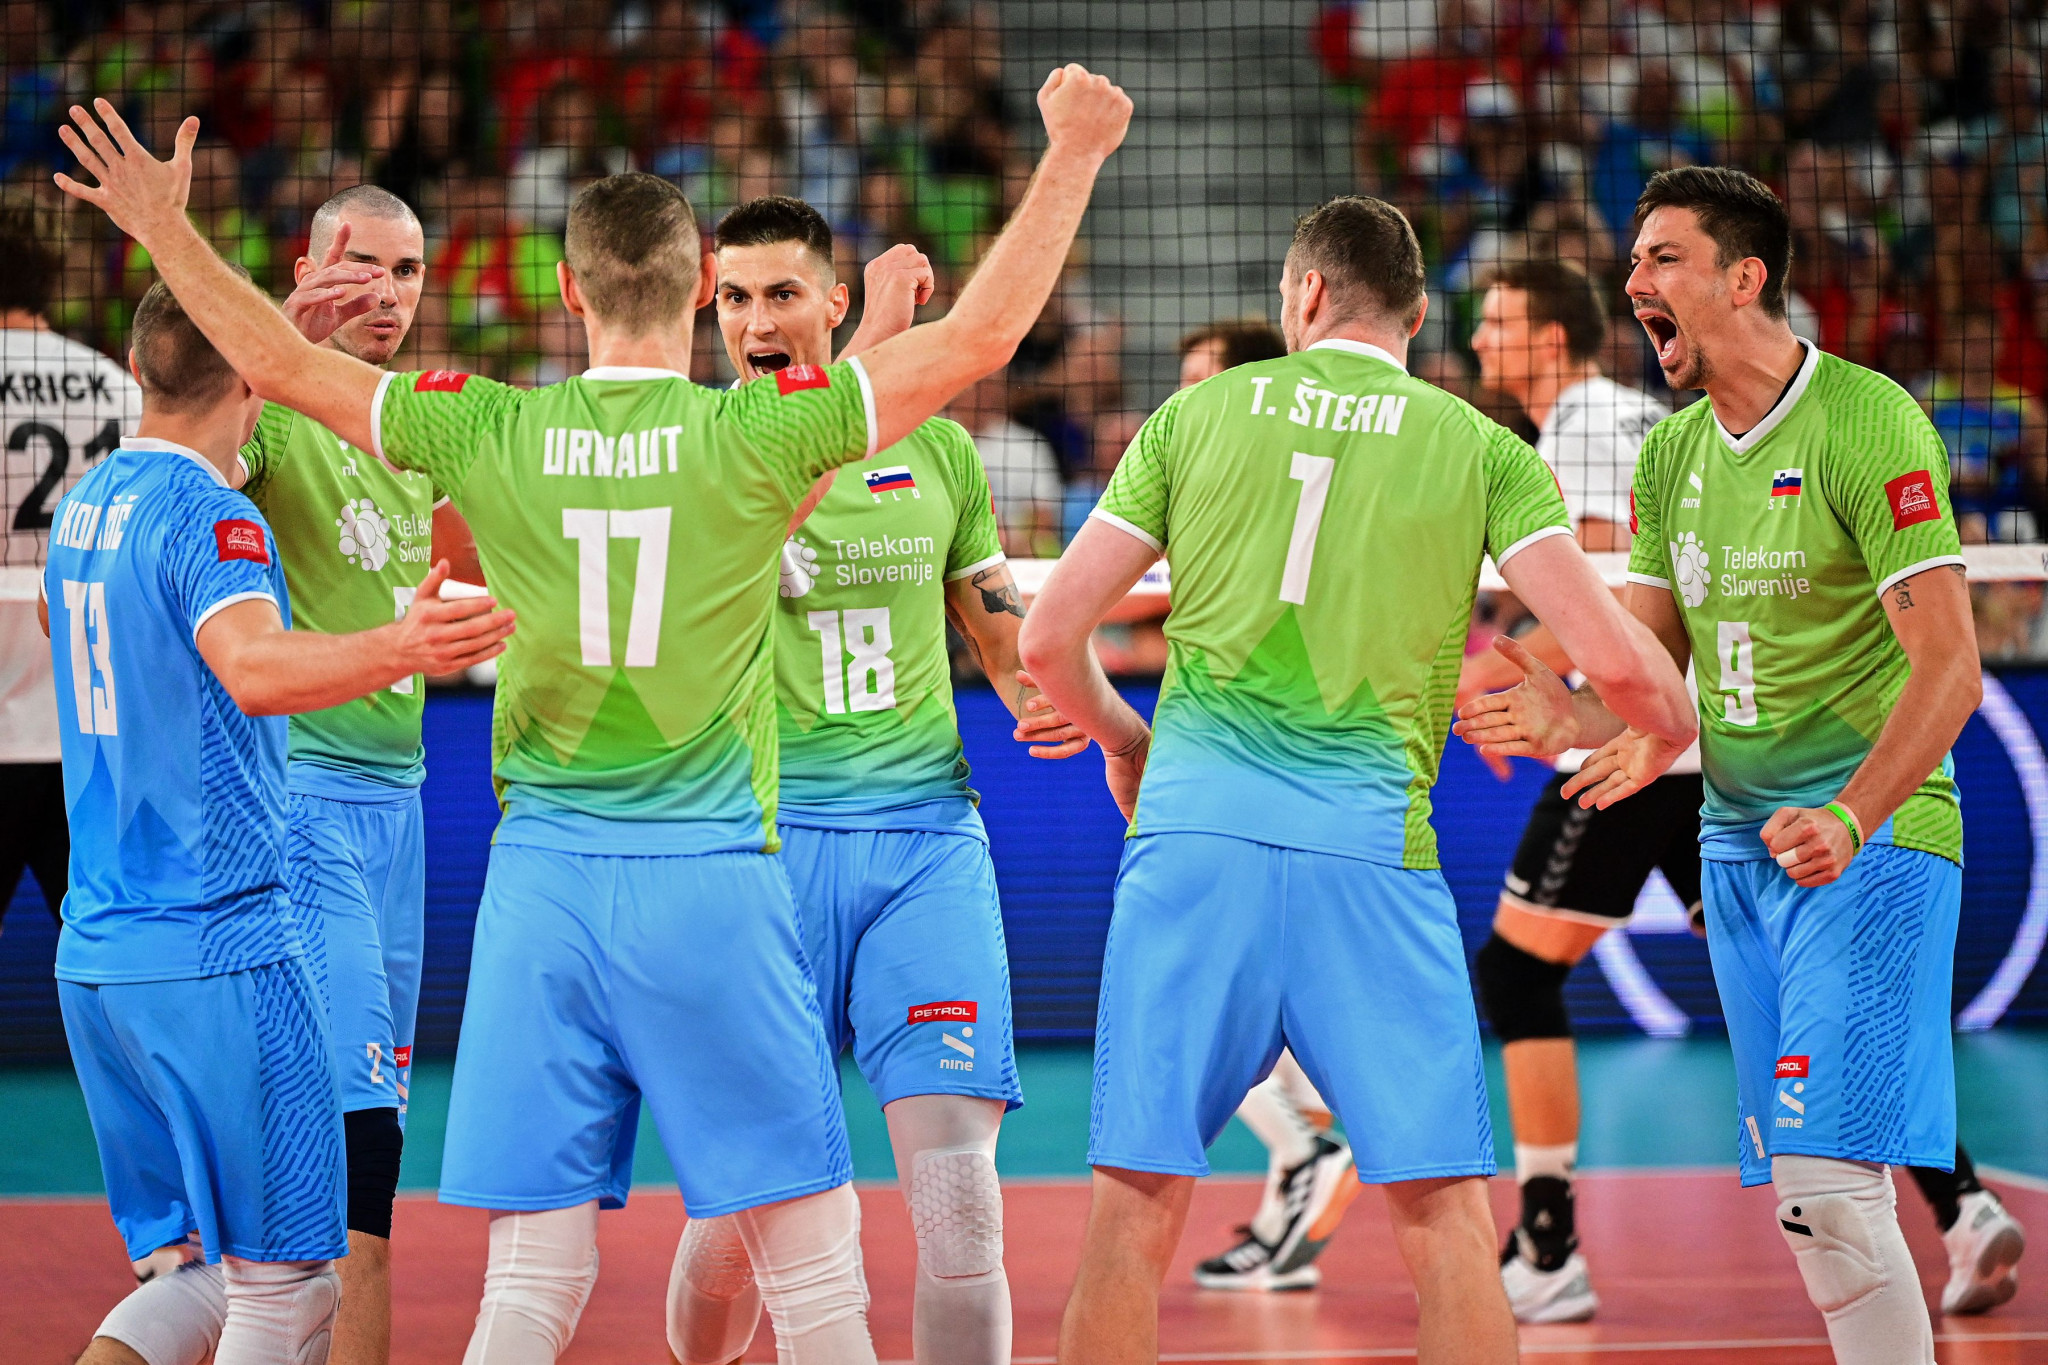 Co-hosts Slovenia reached the Men's Volleyball World Championship quarter-finals for the first time ©Getty Images